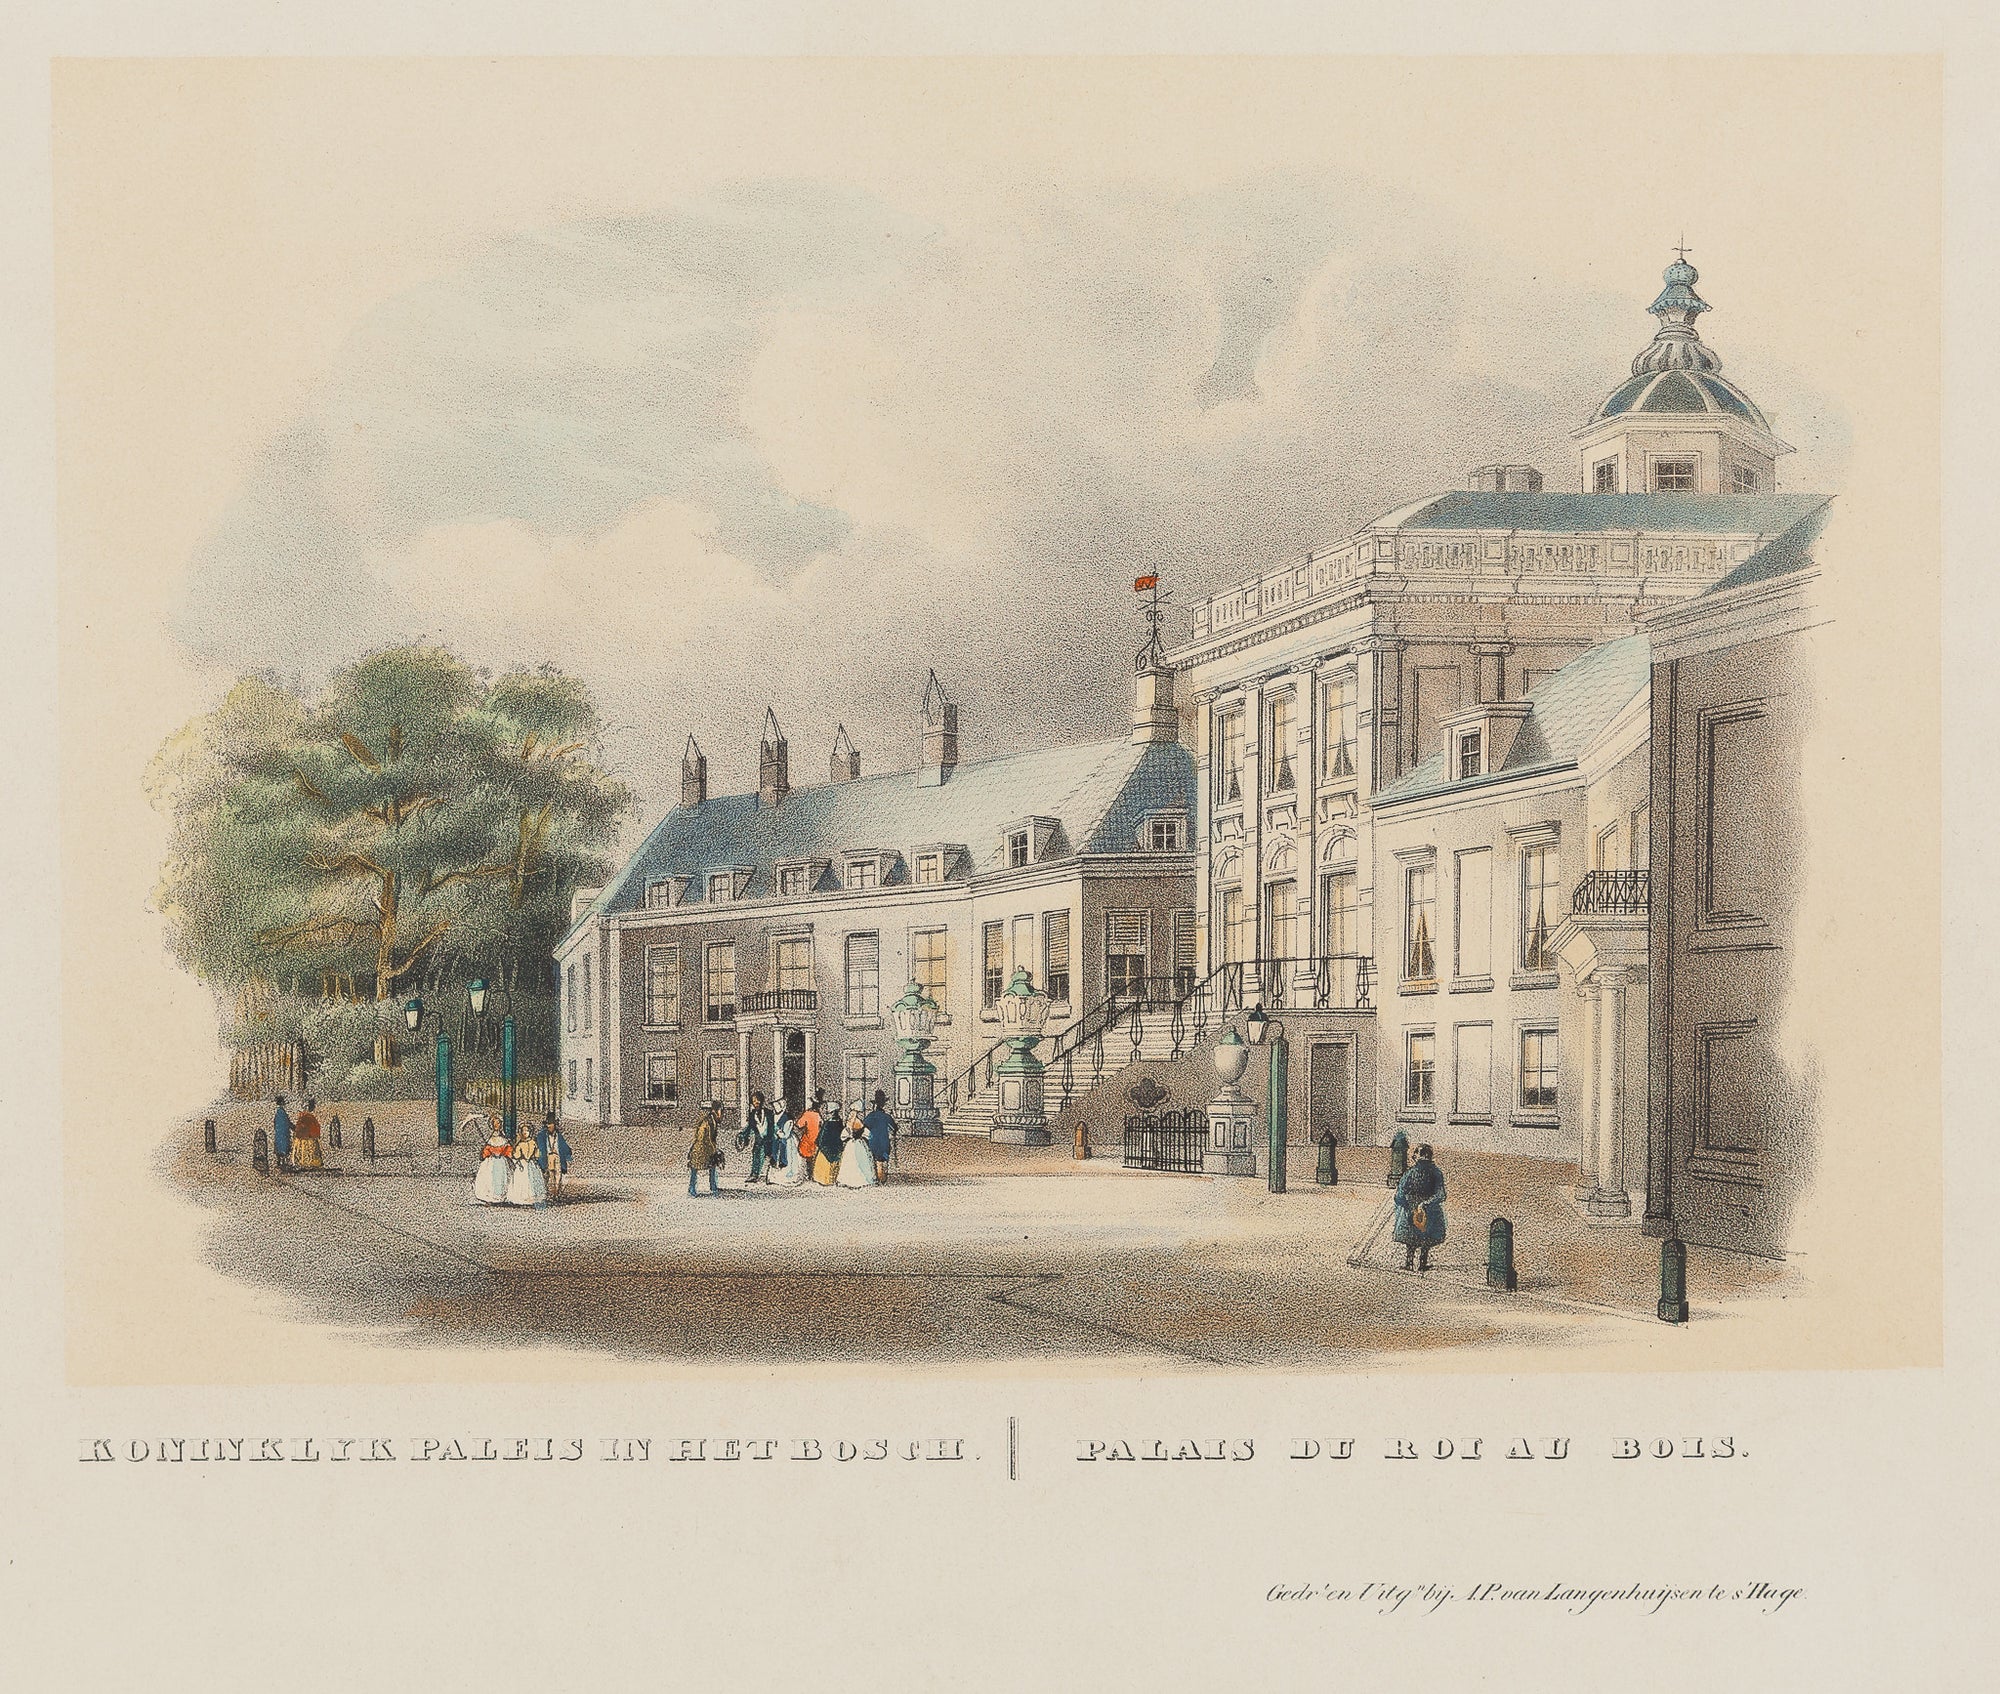 'Koninklyk Paleis in Het Bosch' - The palace Huis ten Bosch seen from the west.  Tinted lithograph with contemporary handcolouring from 1850 by A.P. van Langenhuijsen.